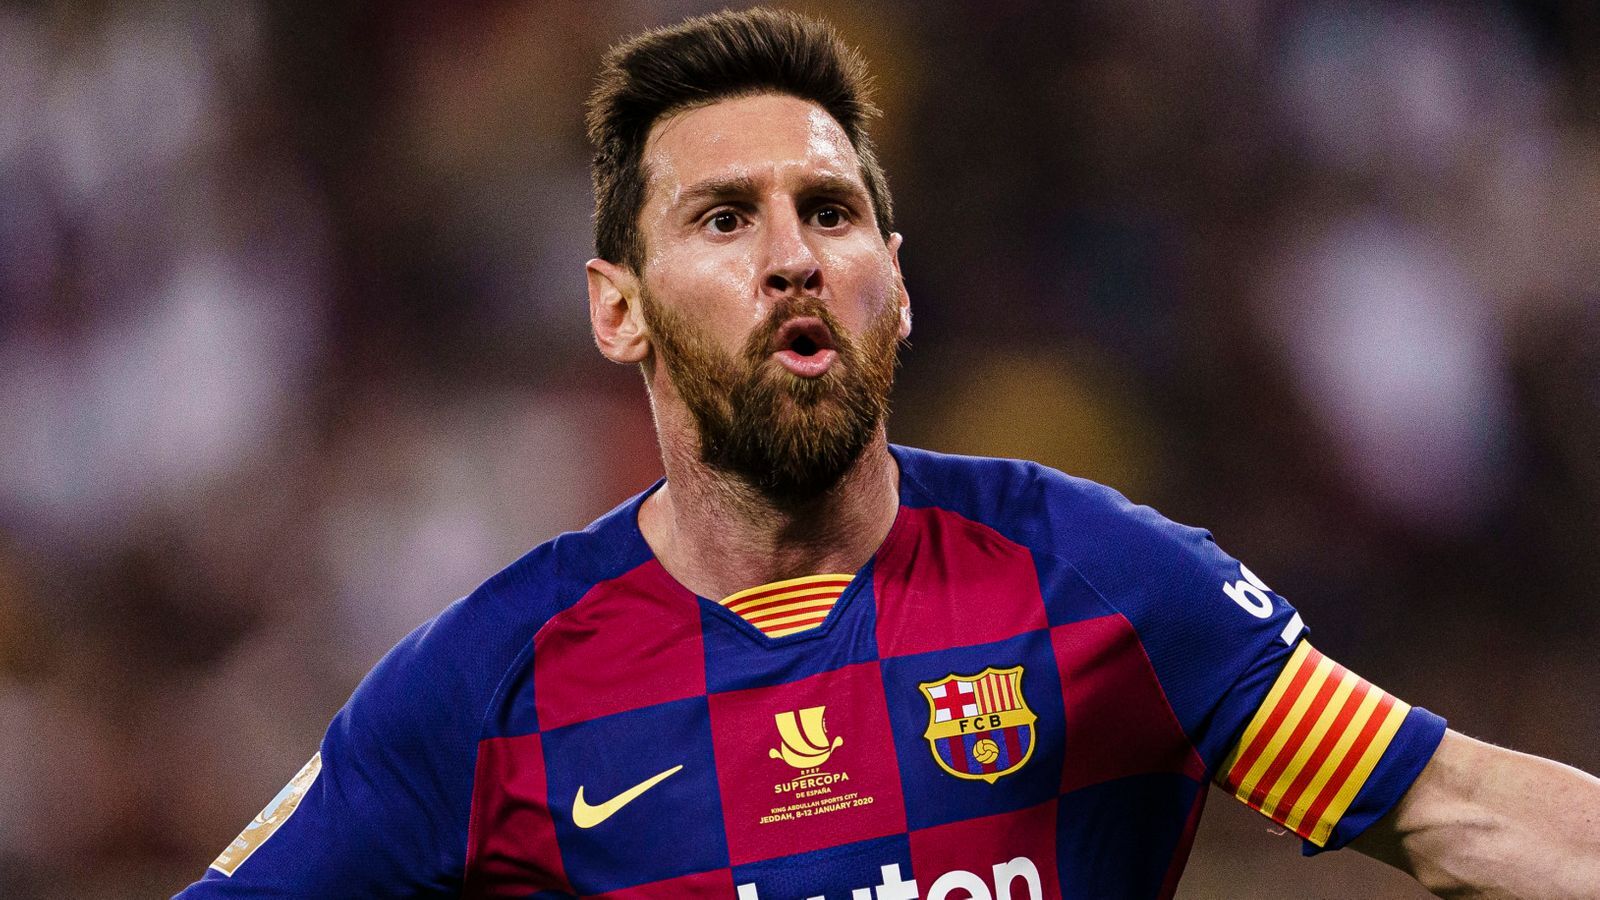 Mallorca Coach Moreno Says Messi Would Be Unstoppable If He Returns Now